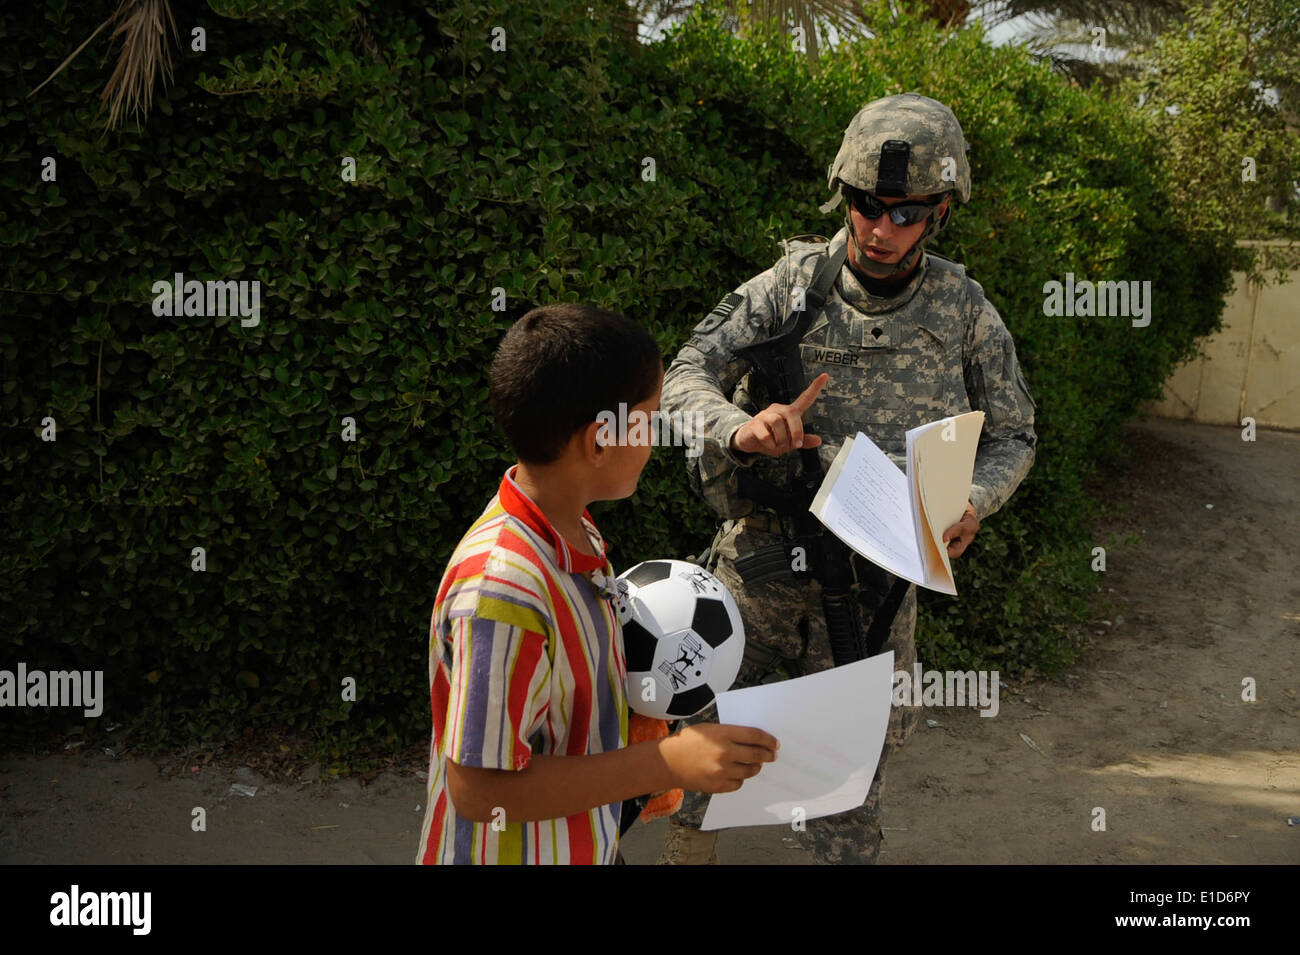 U.S. Army Spc. Nick Weber, from the 303rd Psychological Operations Company, hands out an activity sheet to an Iraqi boy during Stock Photo